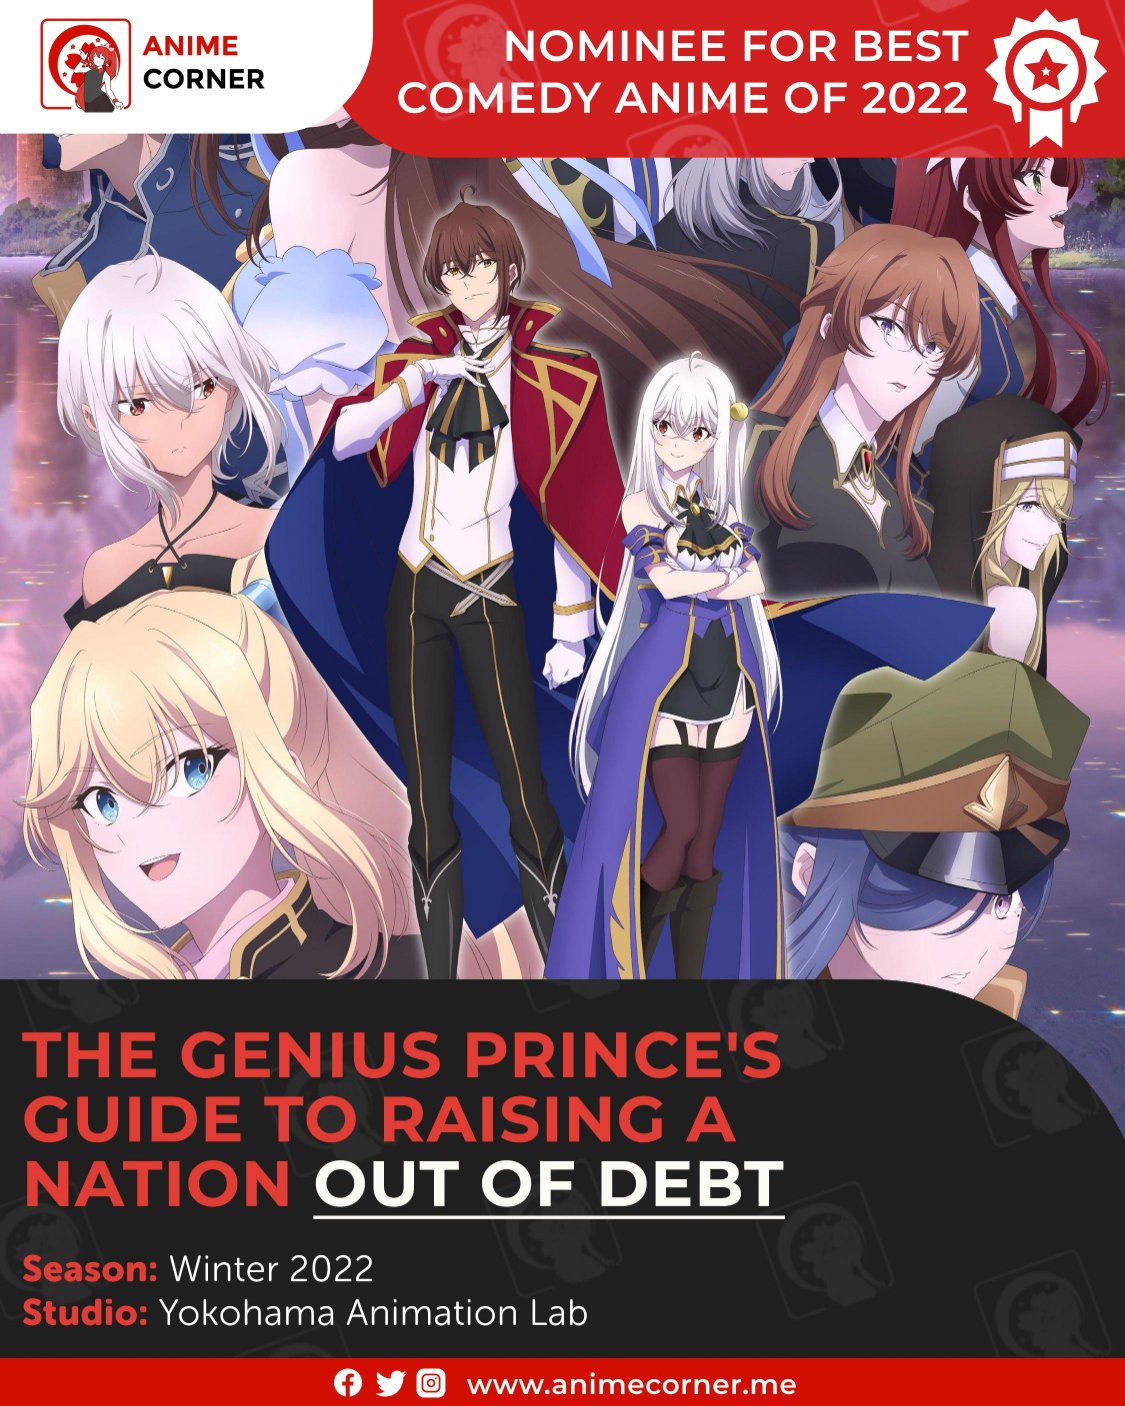 The Genius Prince's Guide to Raising a Nation Out of Debt Season 1